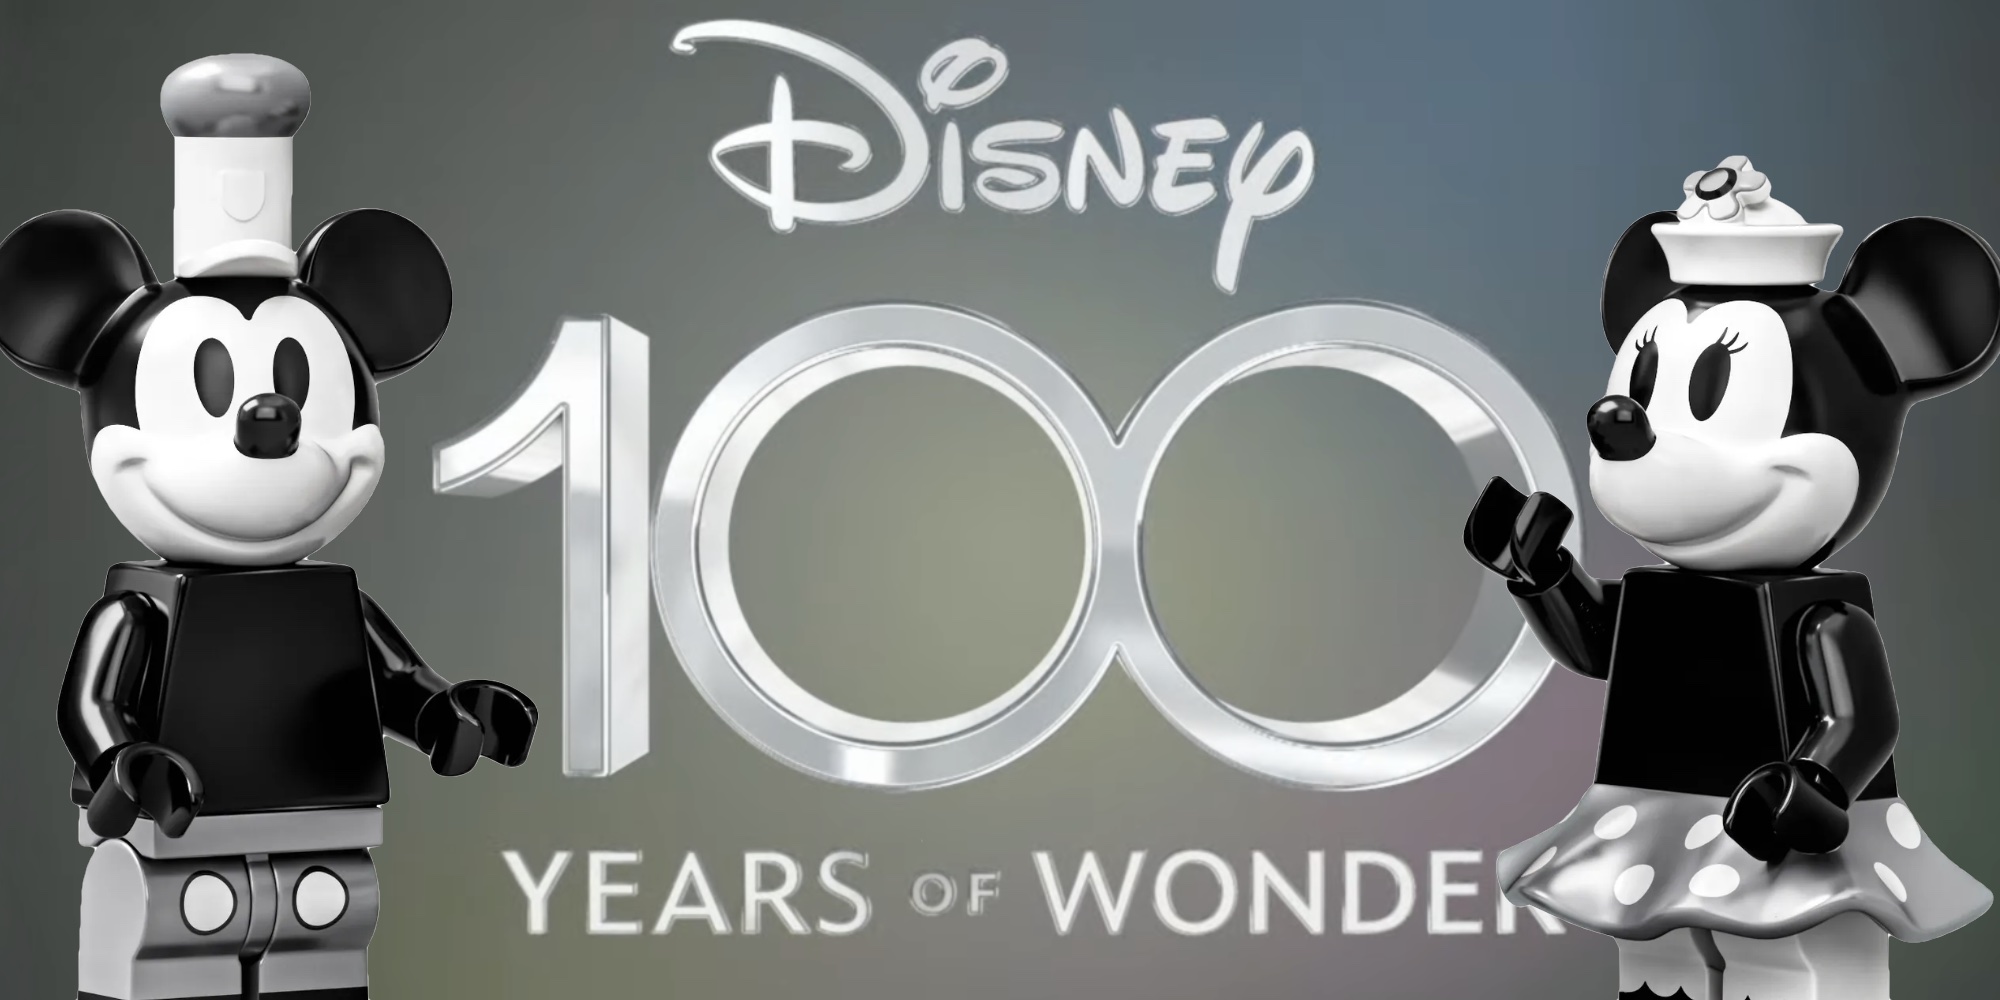 https://9to5toys.com/wp-content/uploads/sites/5/2022/08/LEGO-Disney-100th-anniversary-lead.jpg